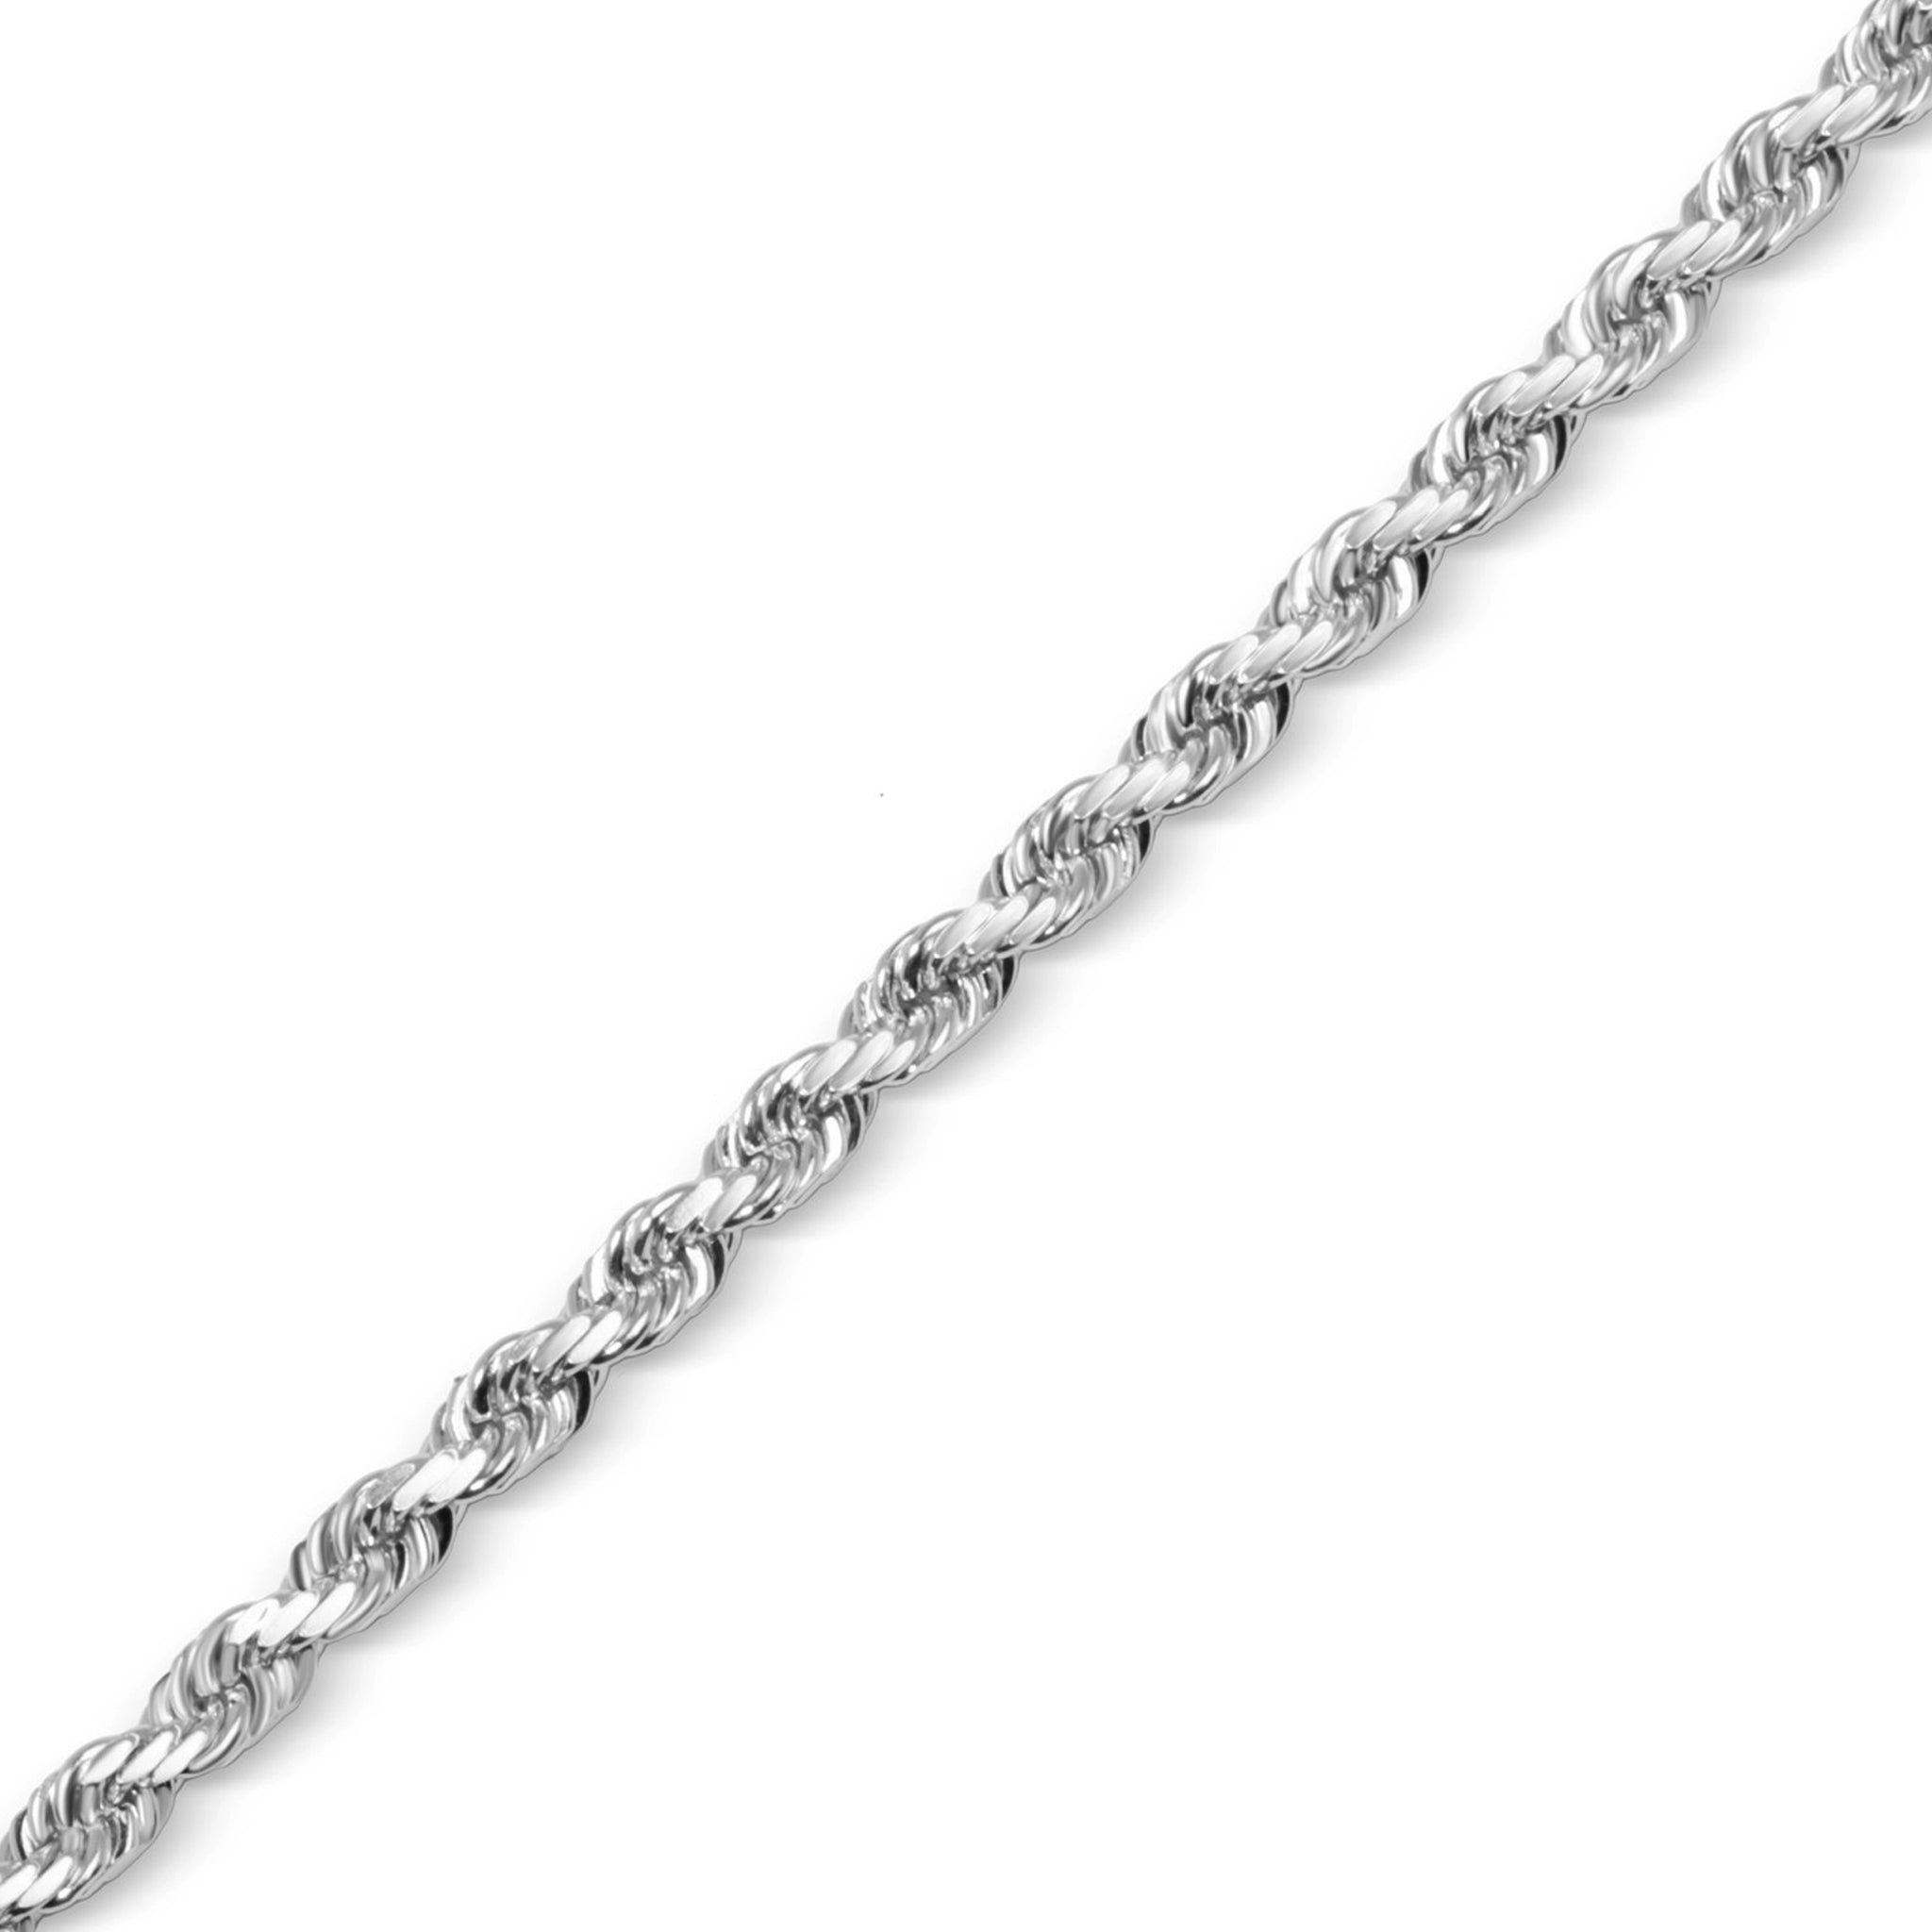 Gold Rope Chain (10mm) - IF & Co.